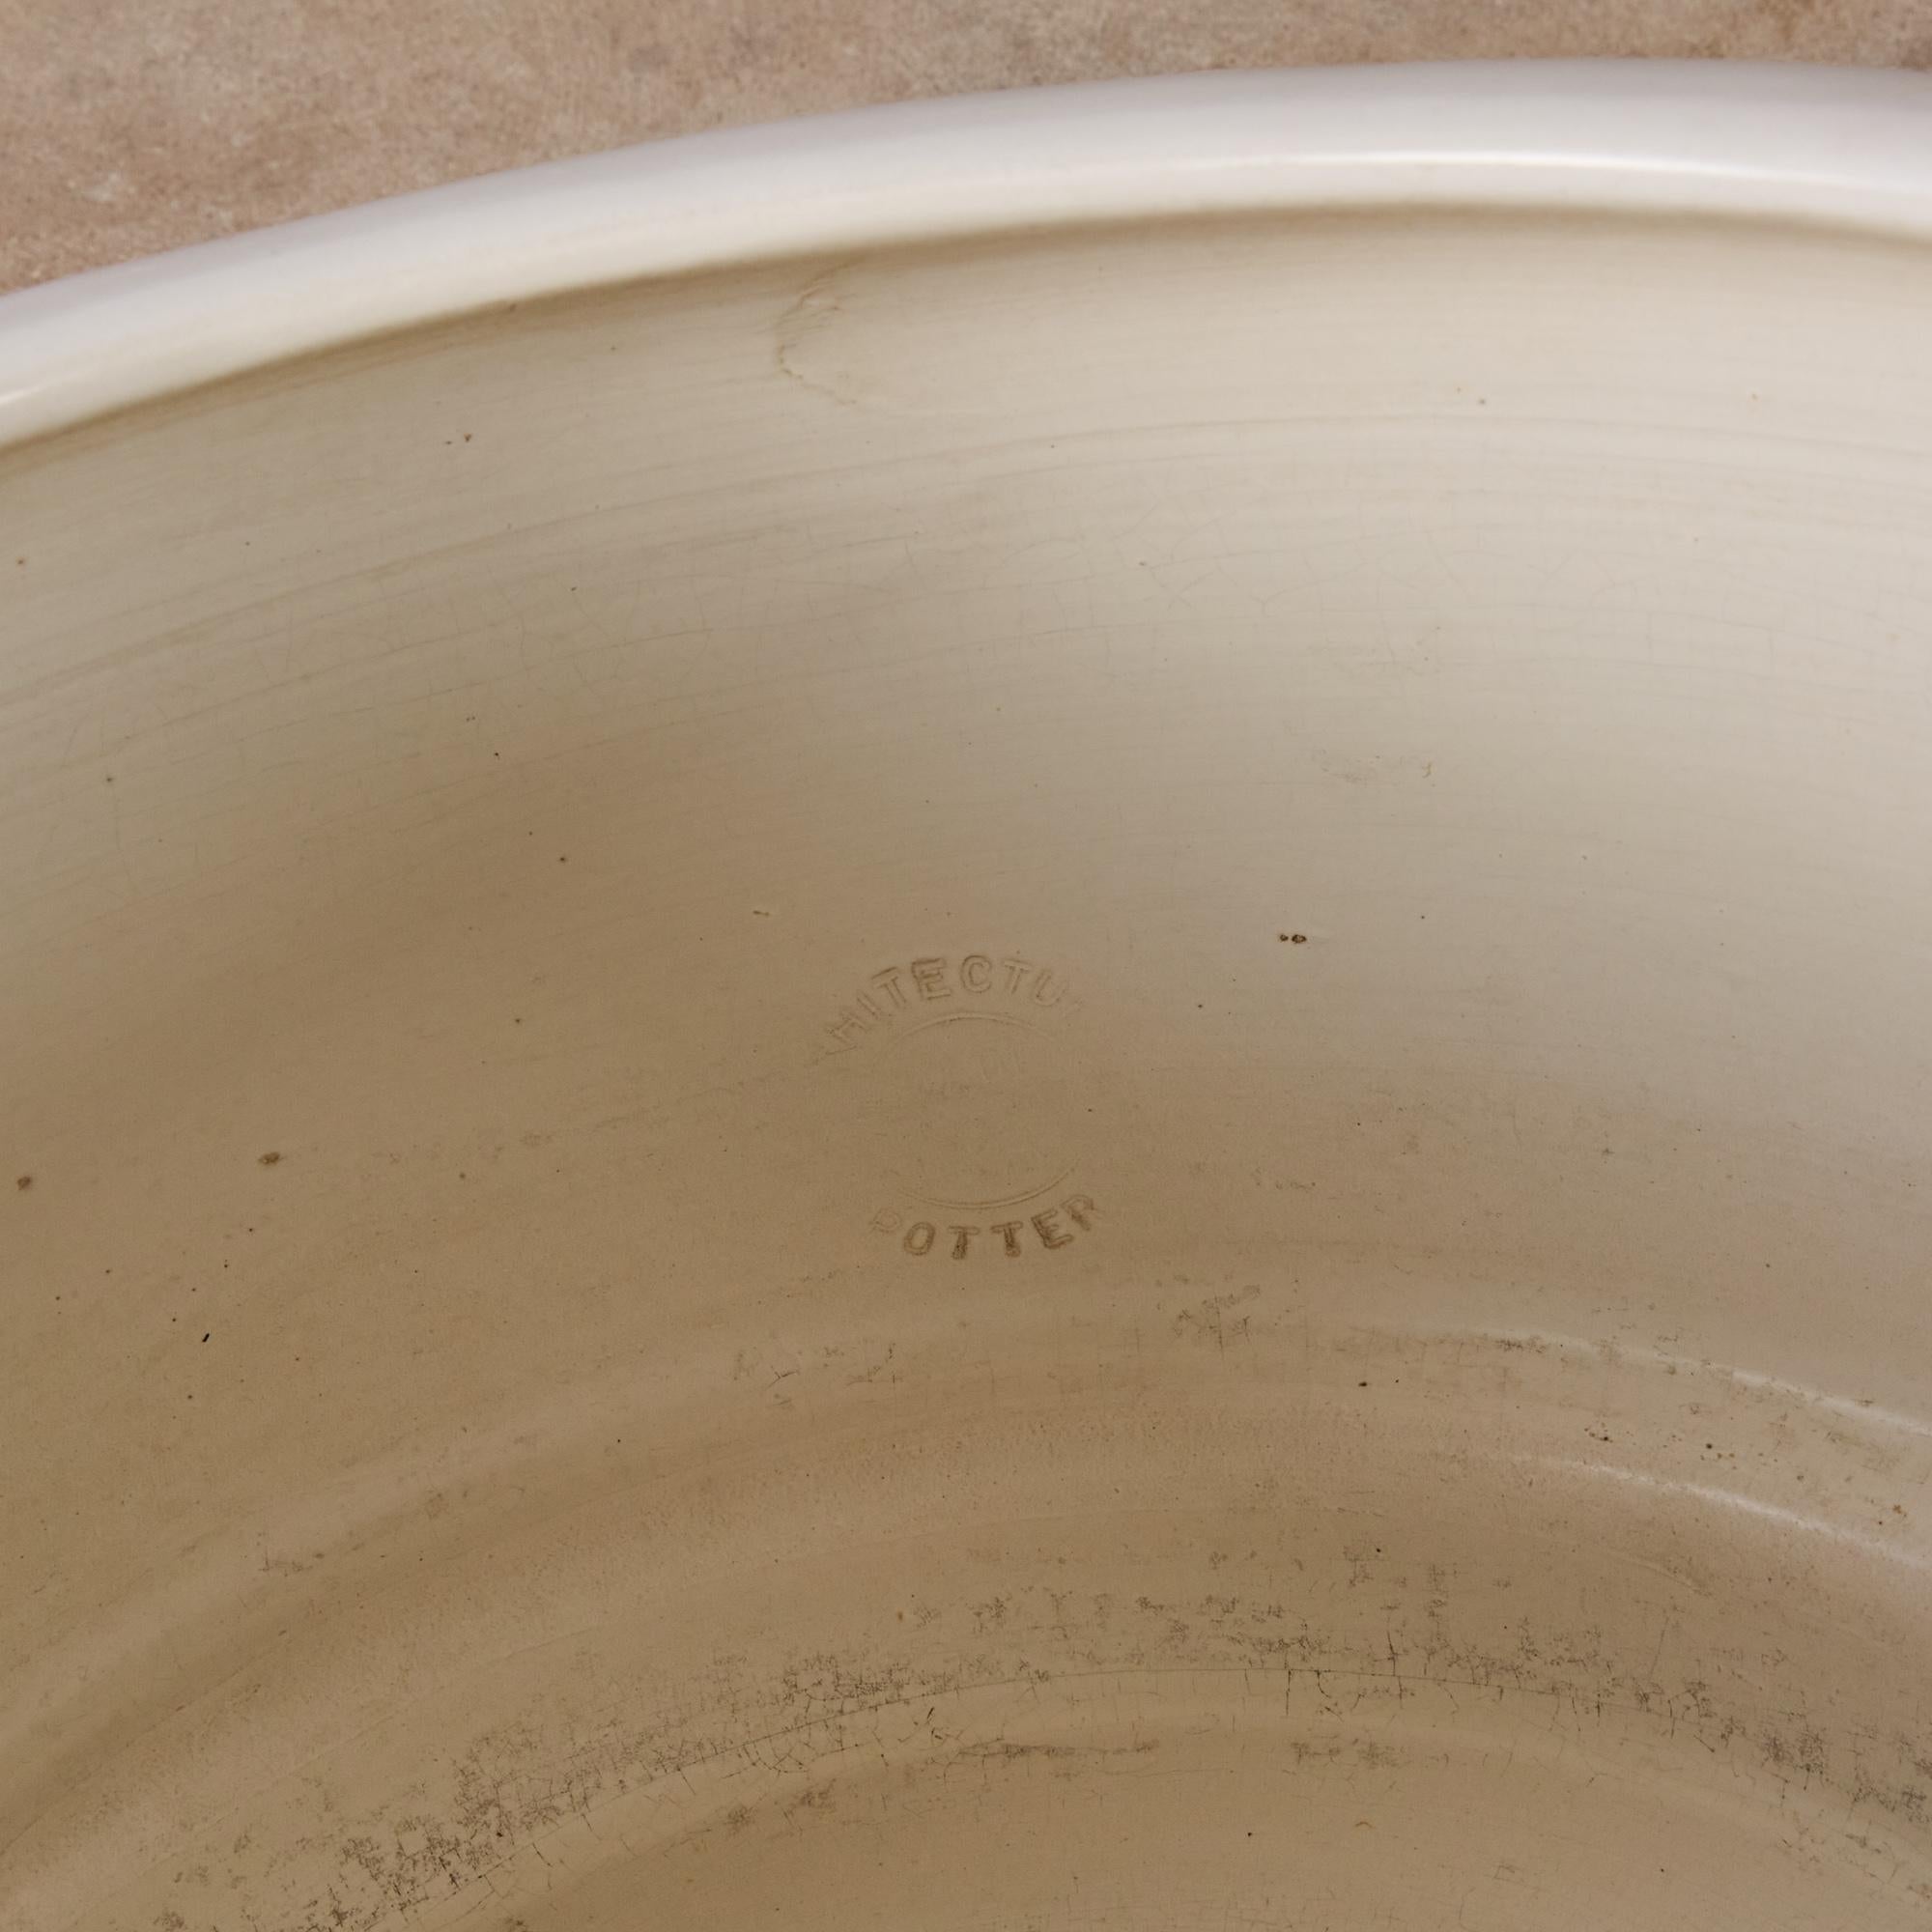 White-Glazed CP-17 Tire Planter by John Follis for Architectural Pottery 3